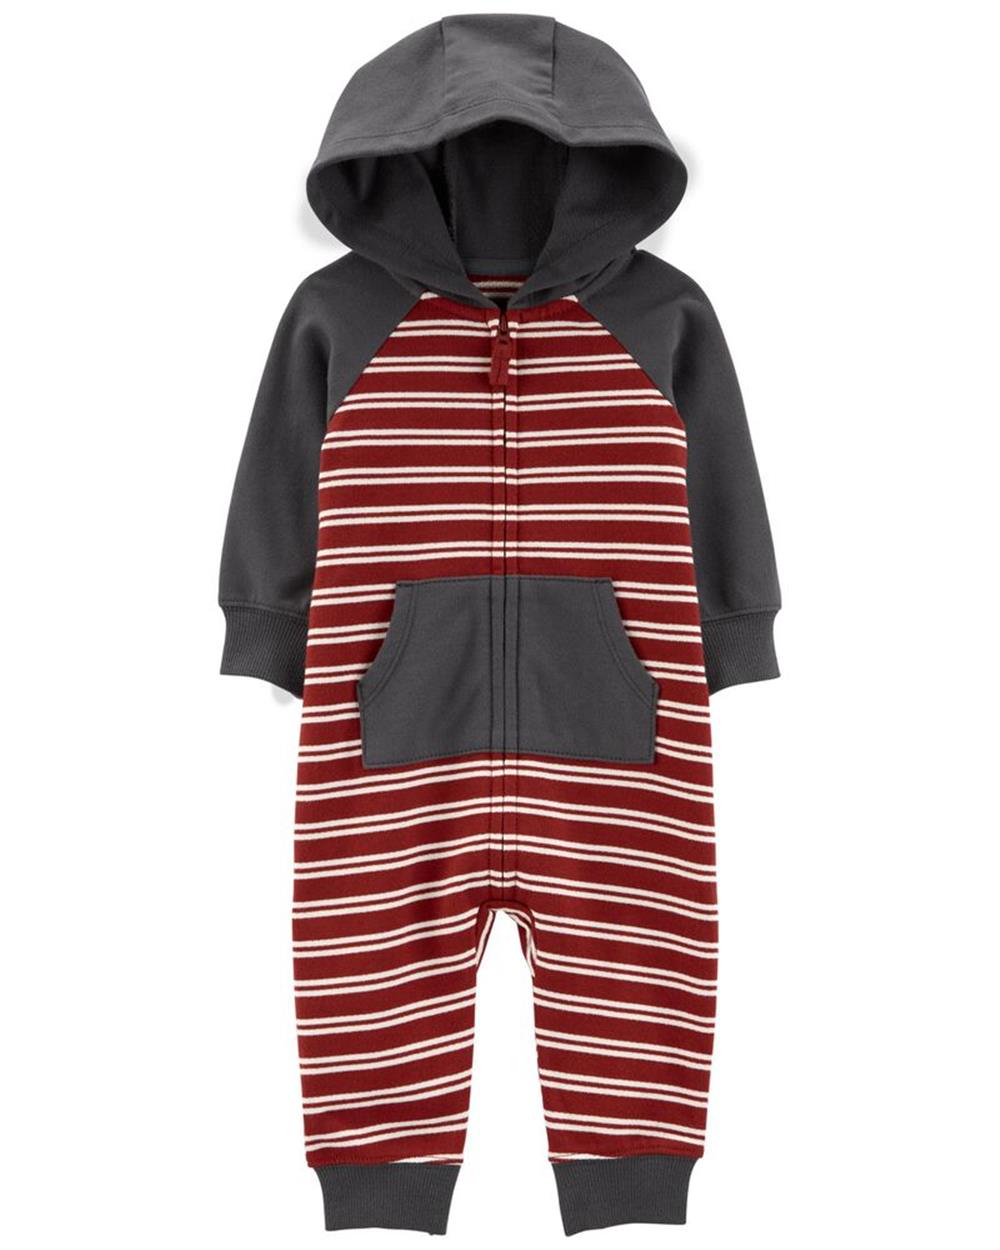 Carters Striped Hooded Jumpsuit